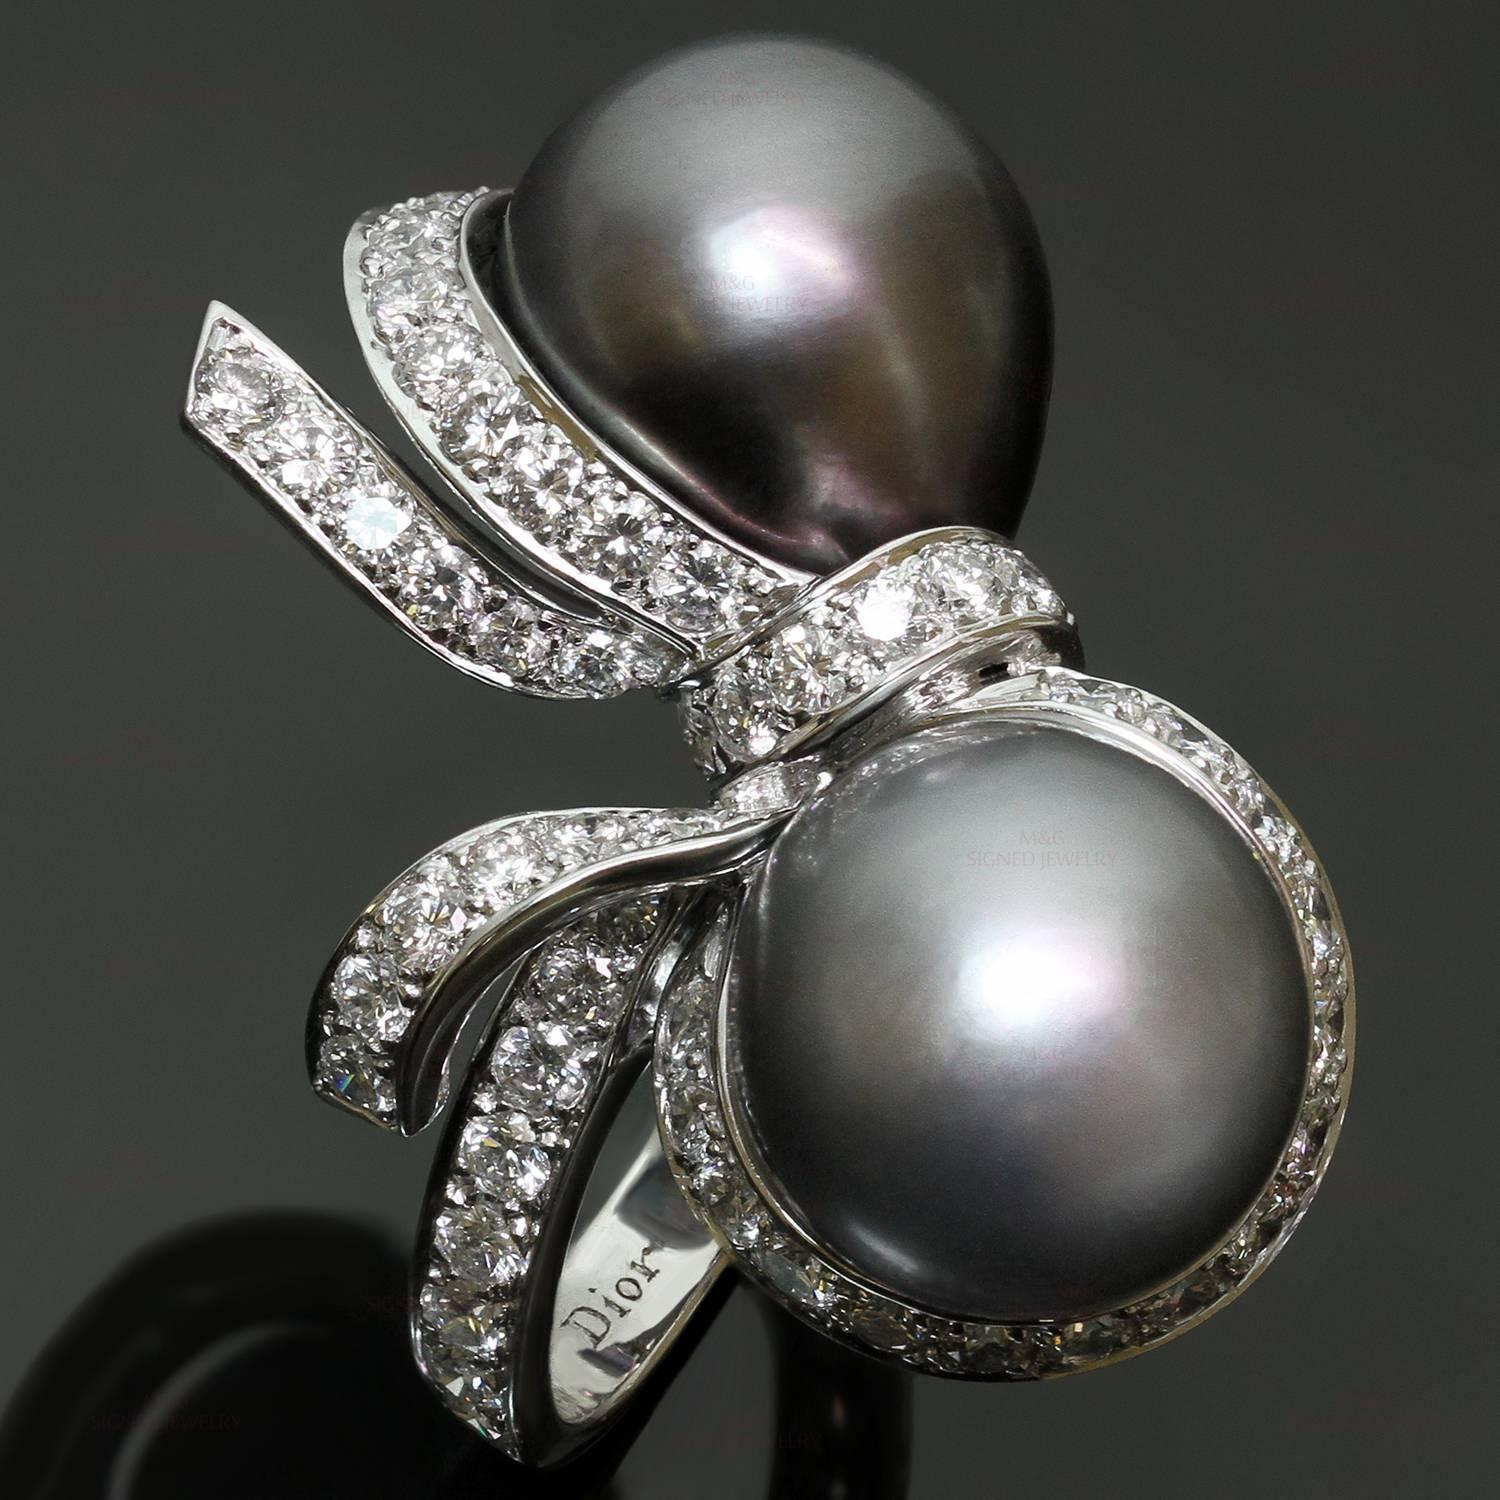 This Christian Dior ring from the Haute Joaillerie Caprice collection features a sparkling bow design crafted in 18k white gold and accented with brilliant-cut diamonds surrounded by a pair of Tahitian pearls. In a tribute to Dior couture, bows and